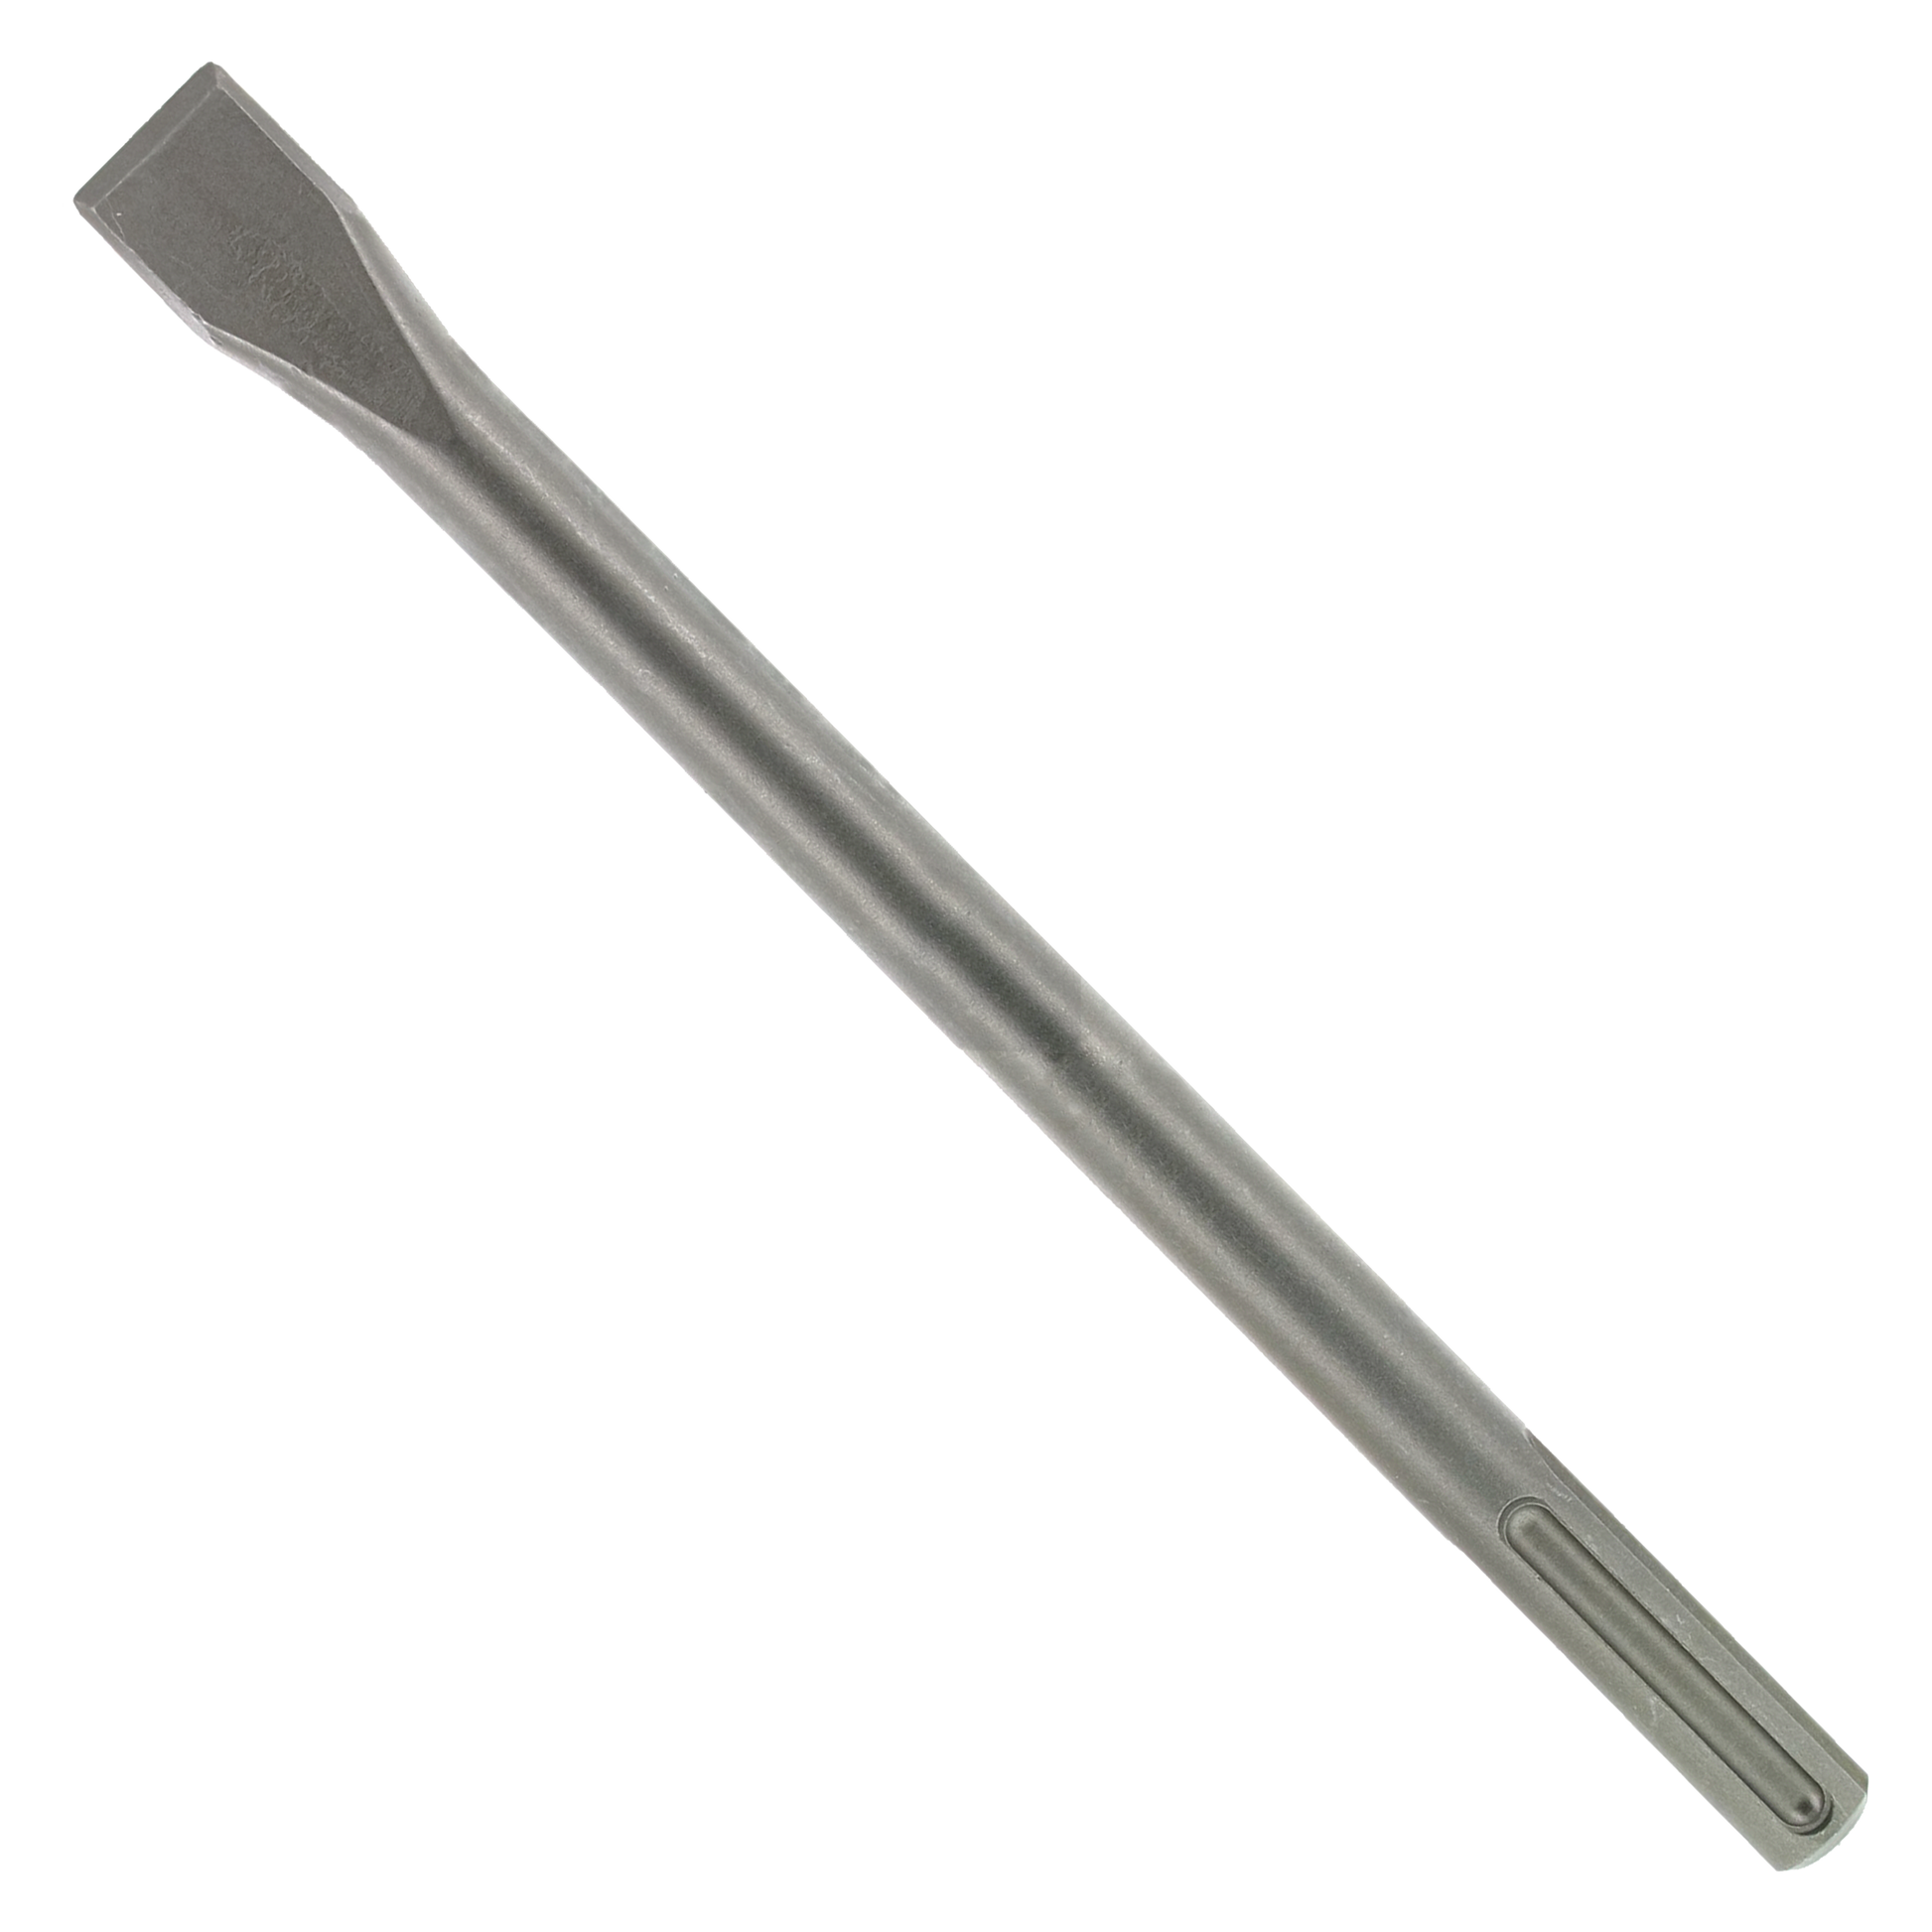 1 in. x 12 in. SDS-Max Flat Chisel